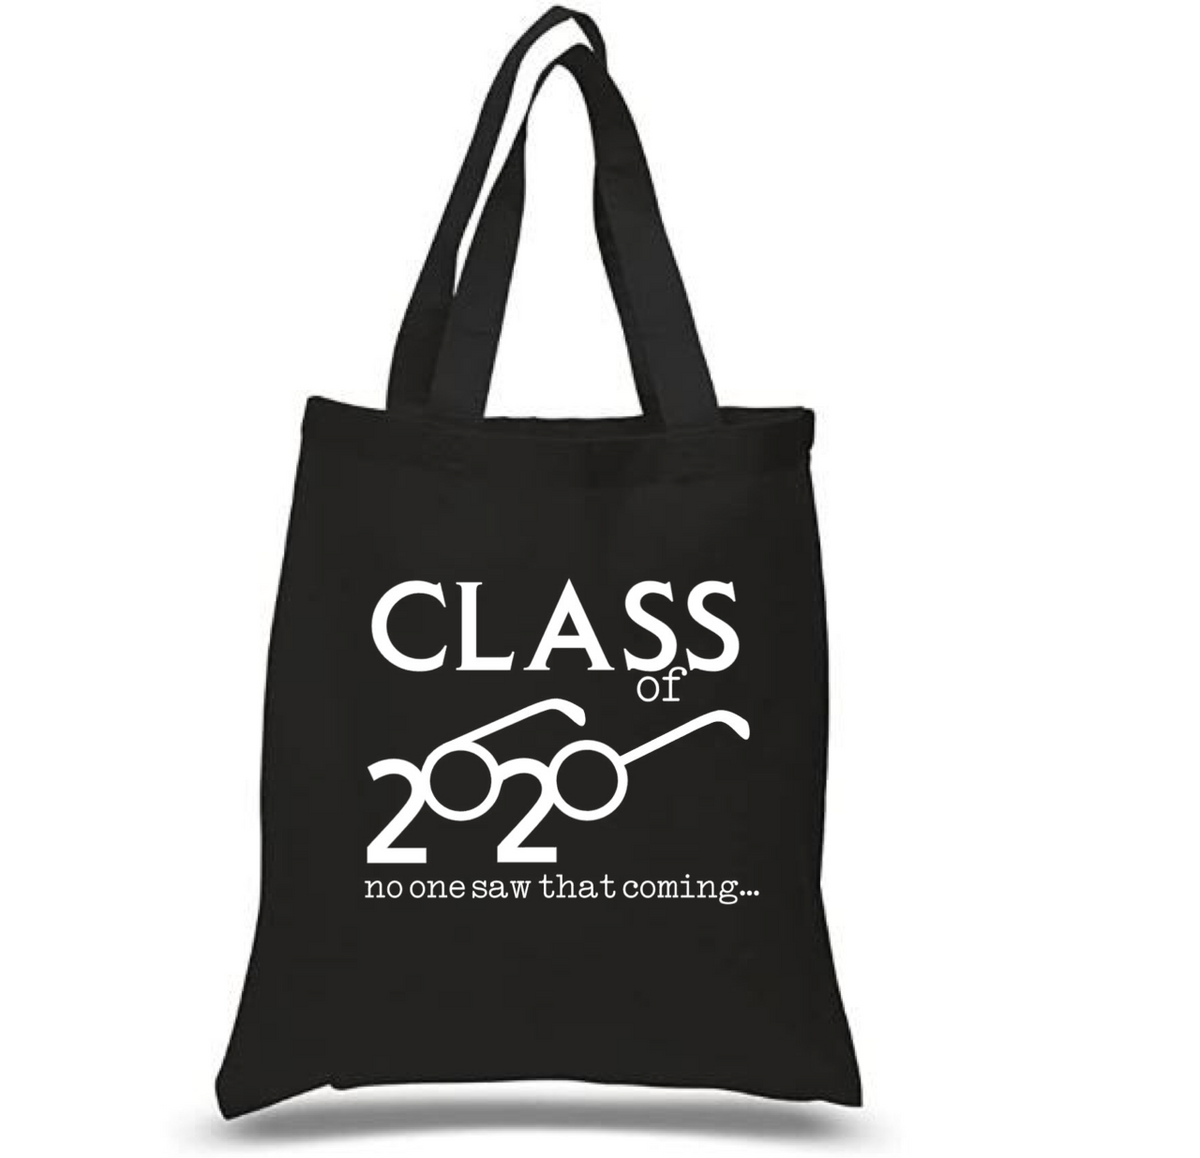 Tote Bag: Class of 2020 No one saw that coming...